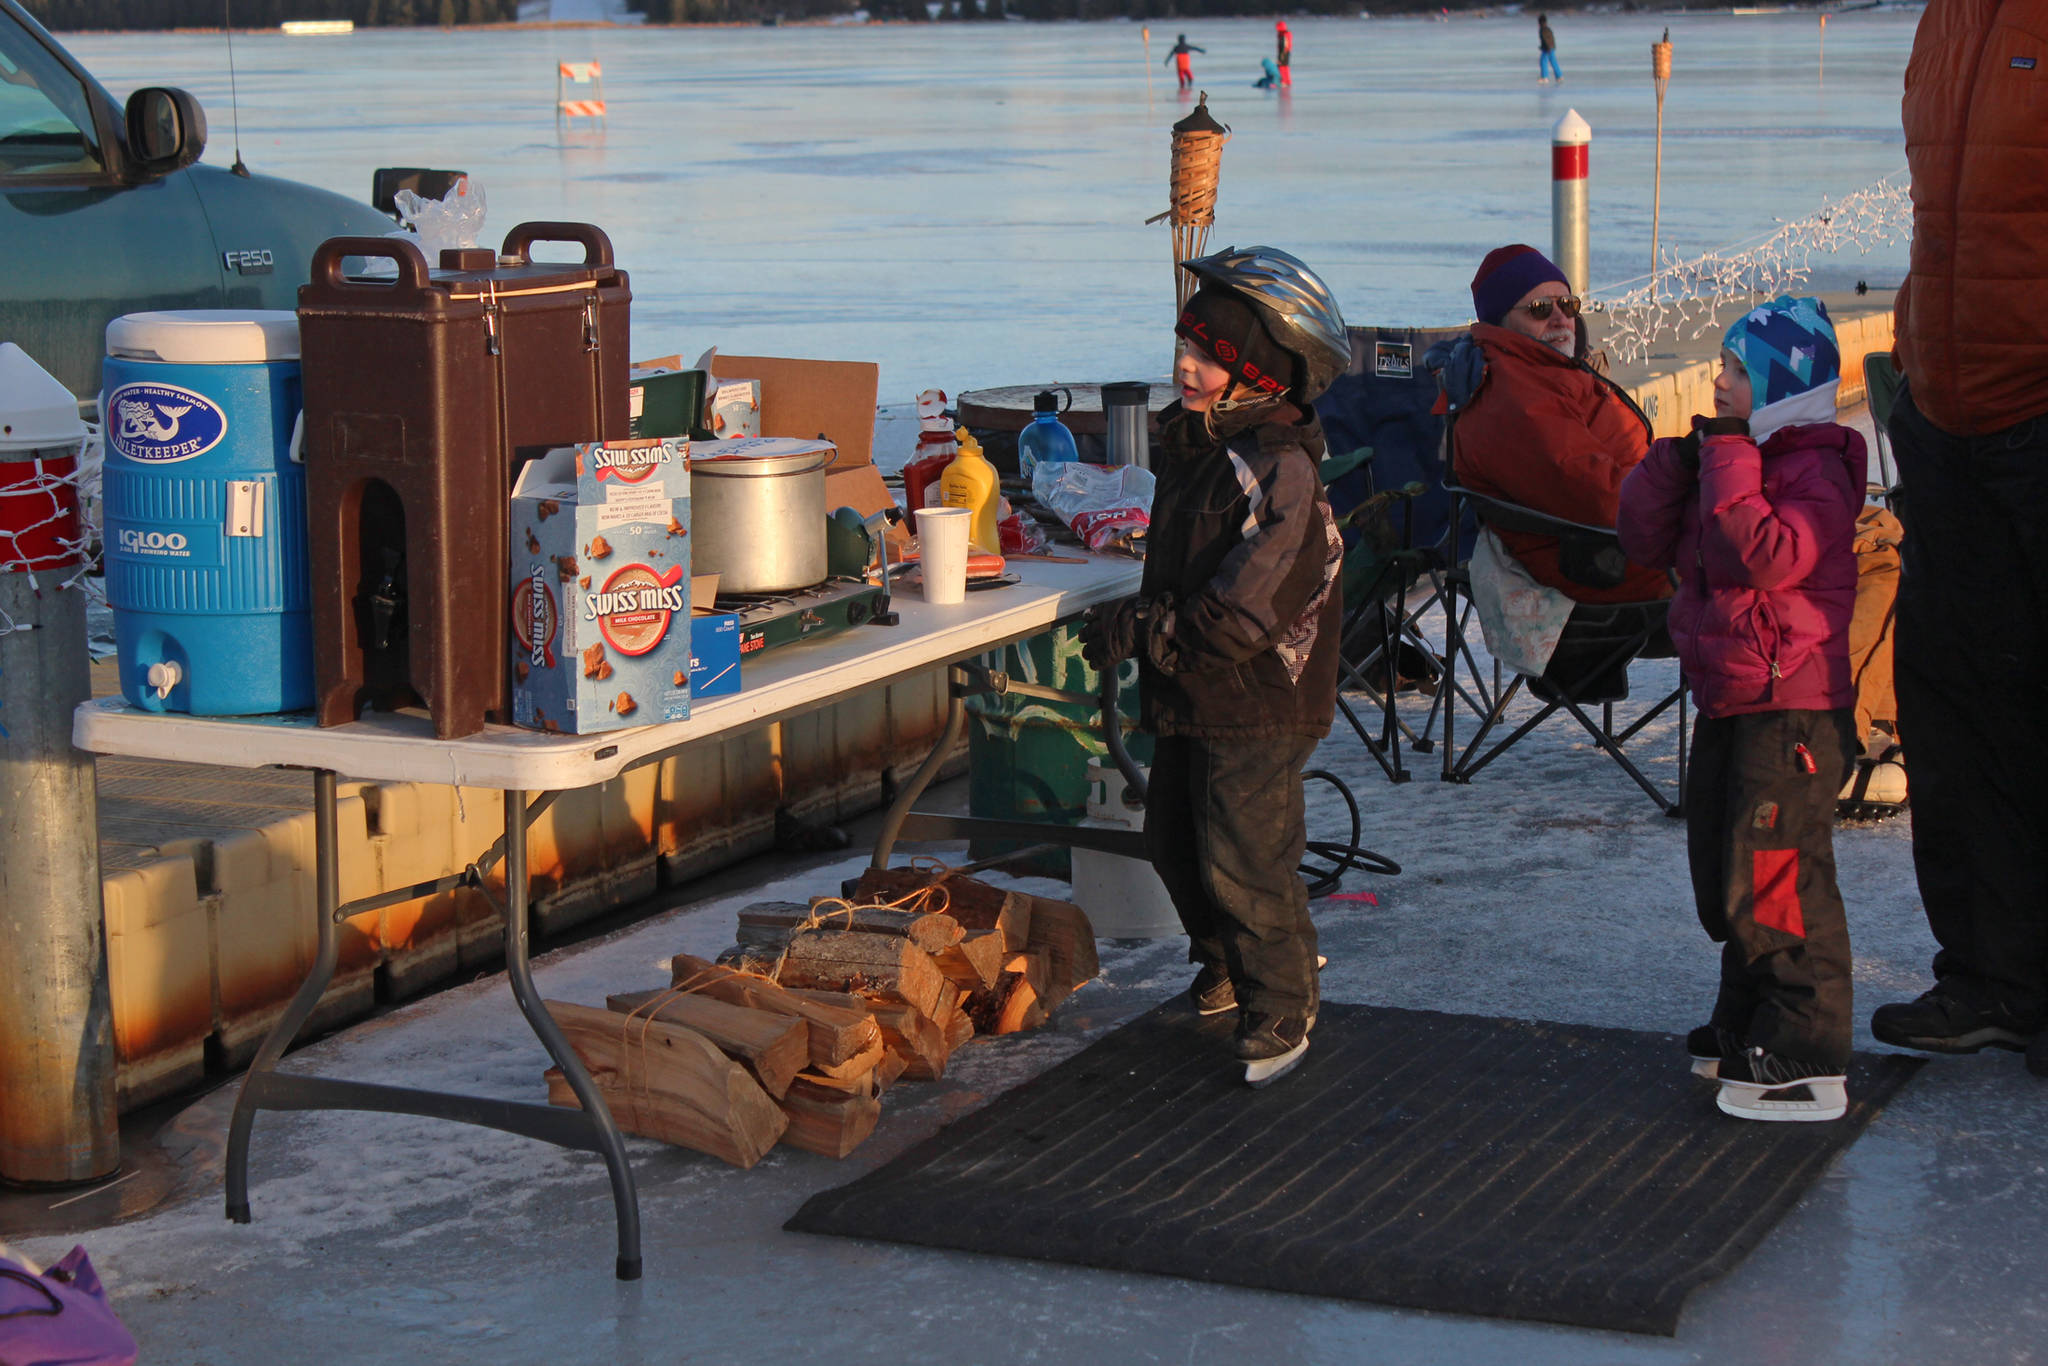 Some youngsters eye the hot chocolate and other offerings at a free ice skating party hosted by Rotary Club of Homer-Kachemak Bay, McDonalds and the City of Homer on Friday, Feb. 15, 2019 at Ben Walters Park and Beluga Lake in Homer, Alaska. (Photo by Megan Pacer/Homer News)